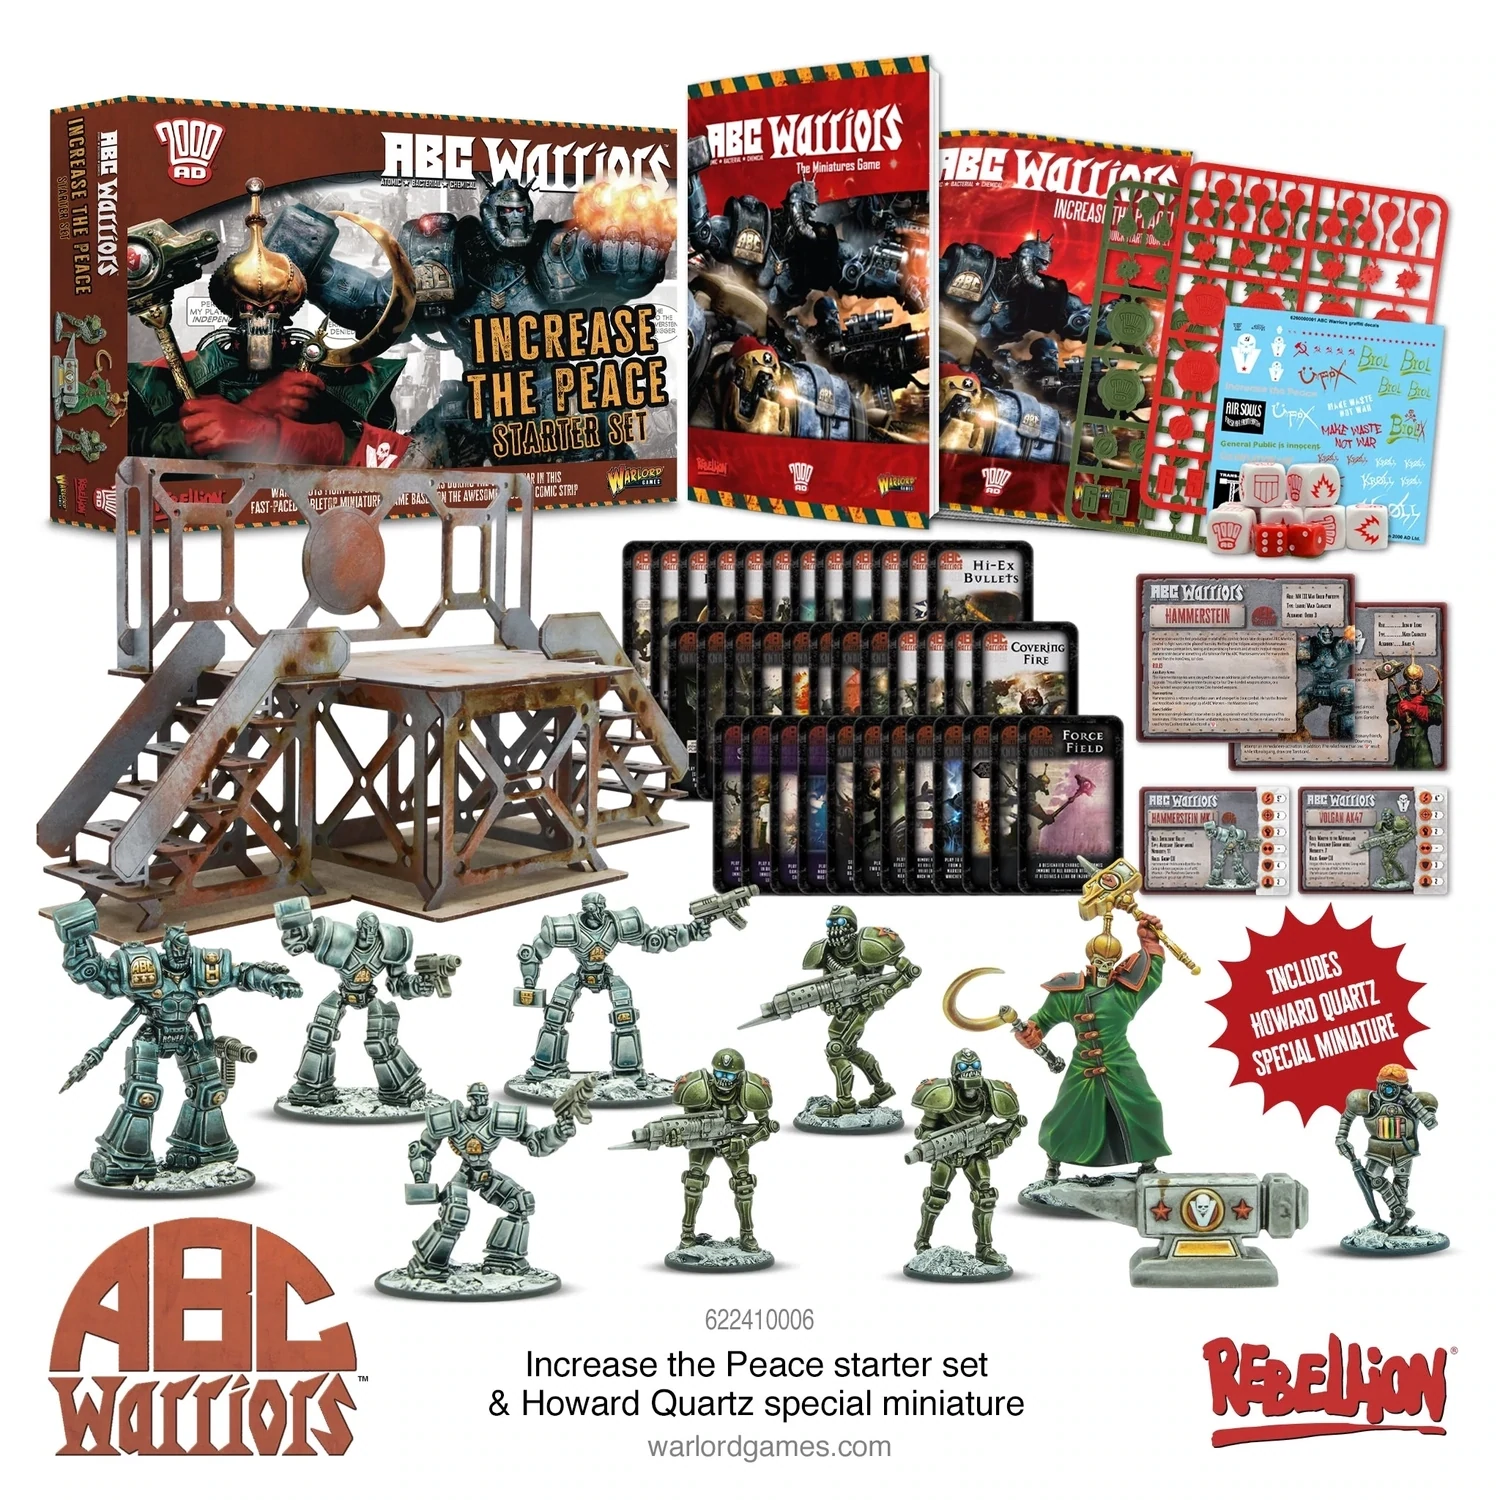 ABC Warriors: Increase the Peace Starter Game & Howard Quartz 'Mr Ten per cent' Special Miniature - Warlord Games